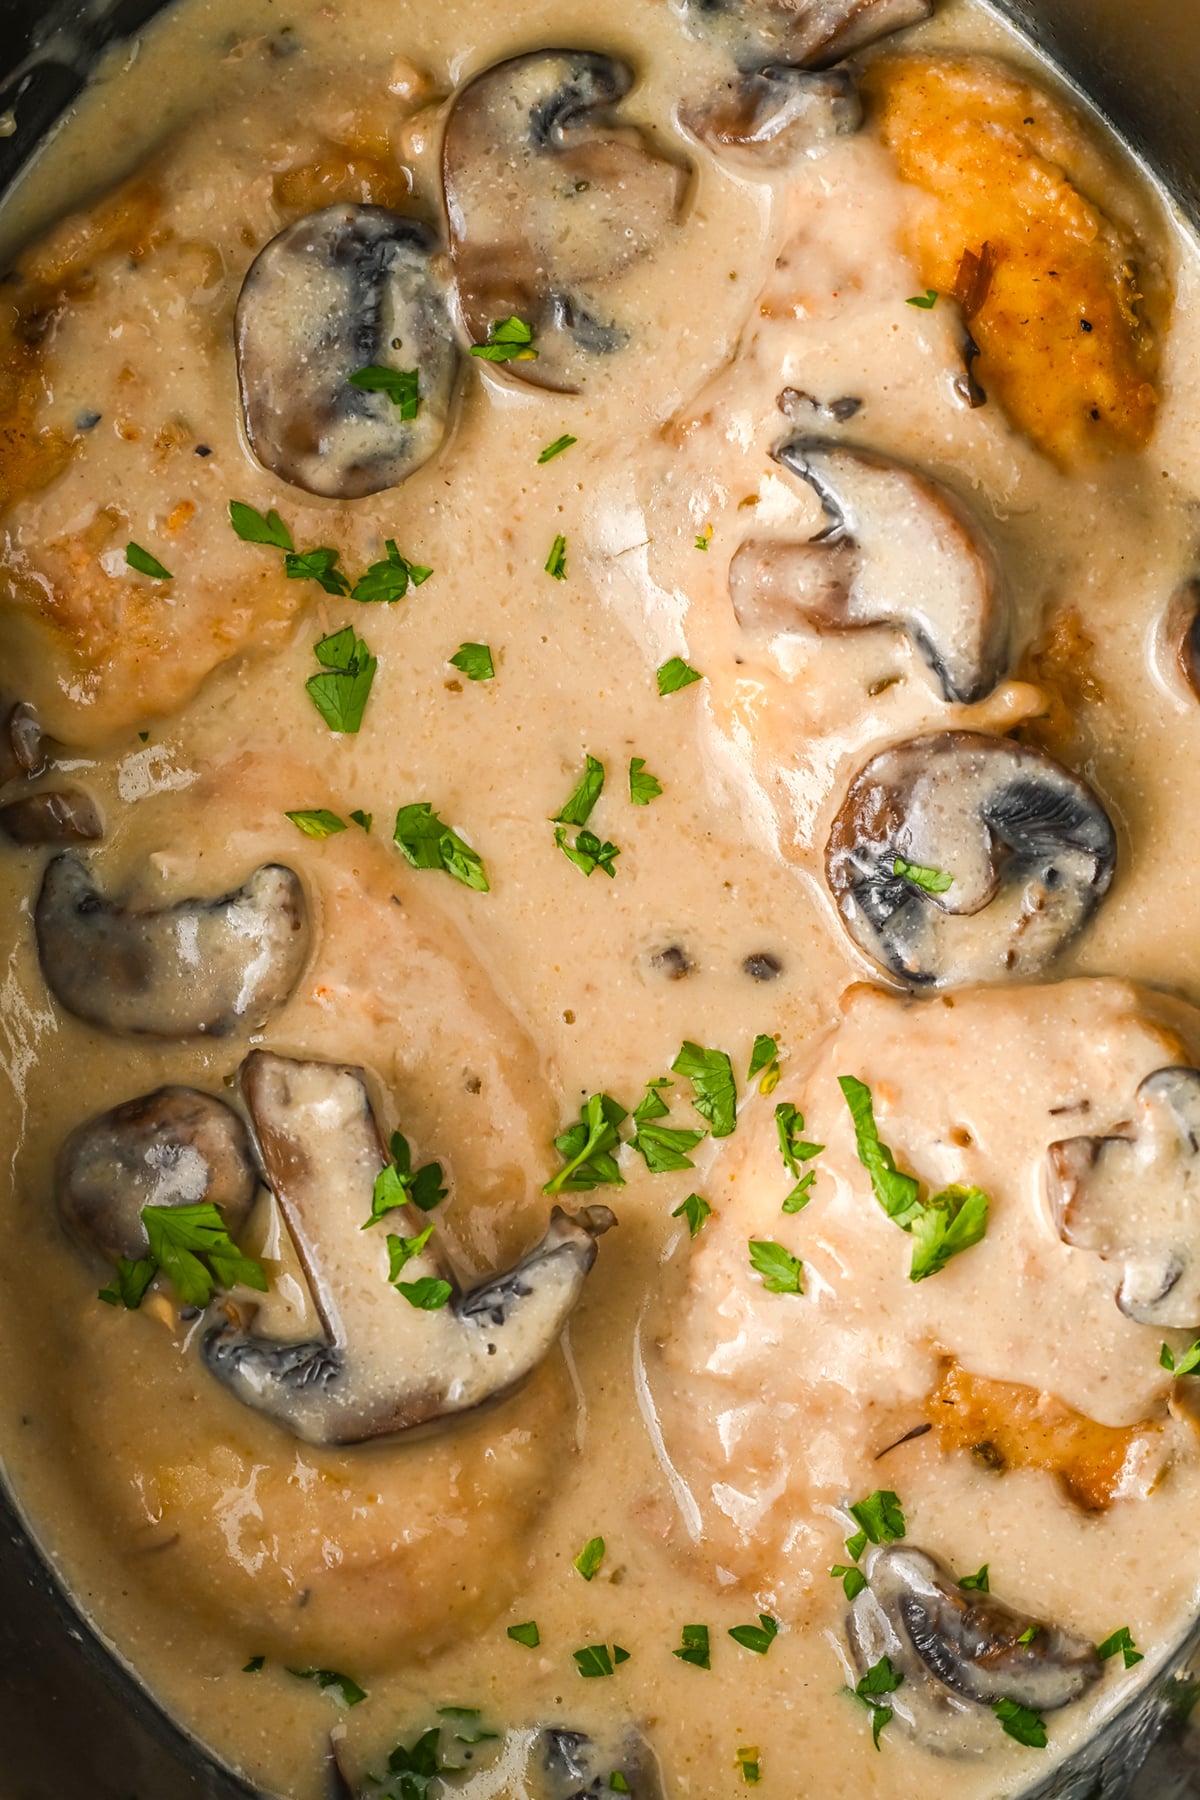 Creamy chicken marsala is cooked and garnished